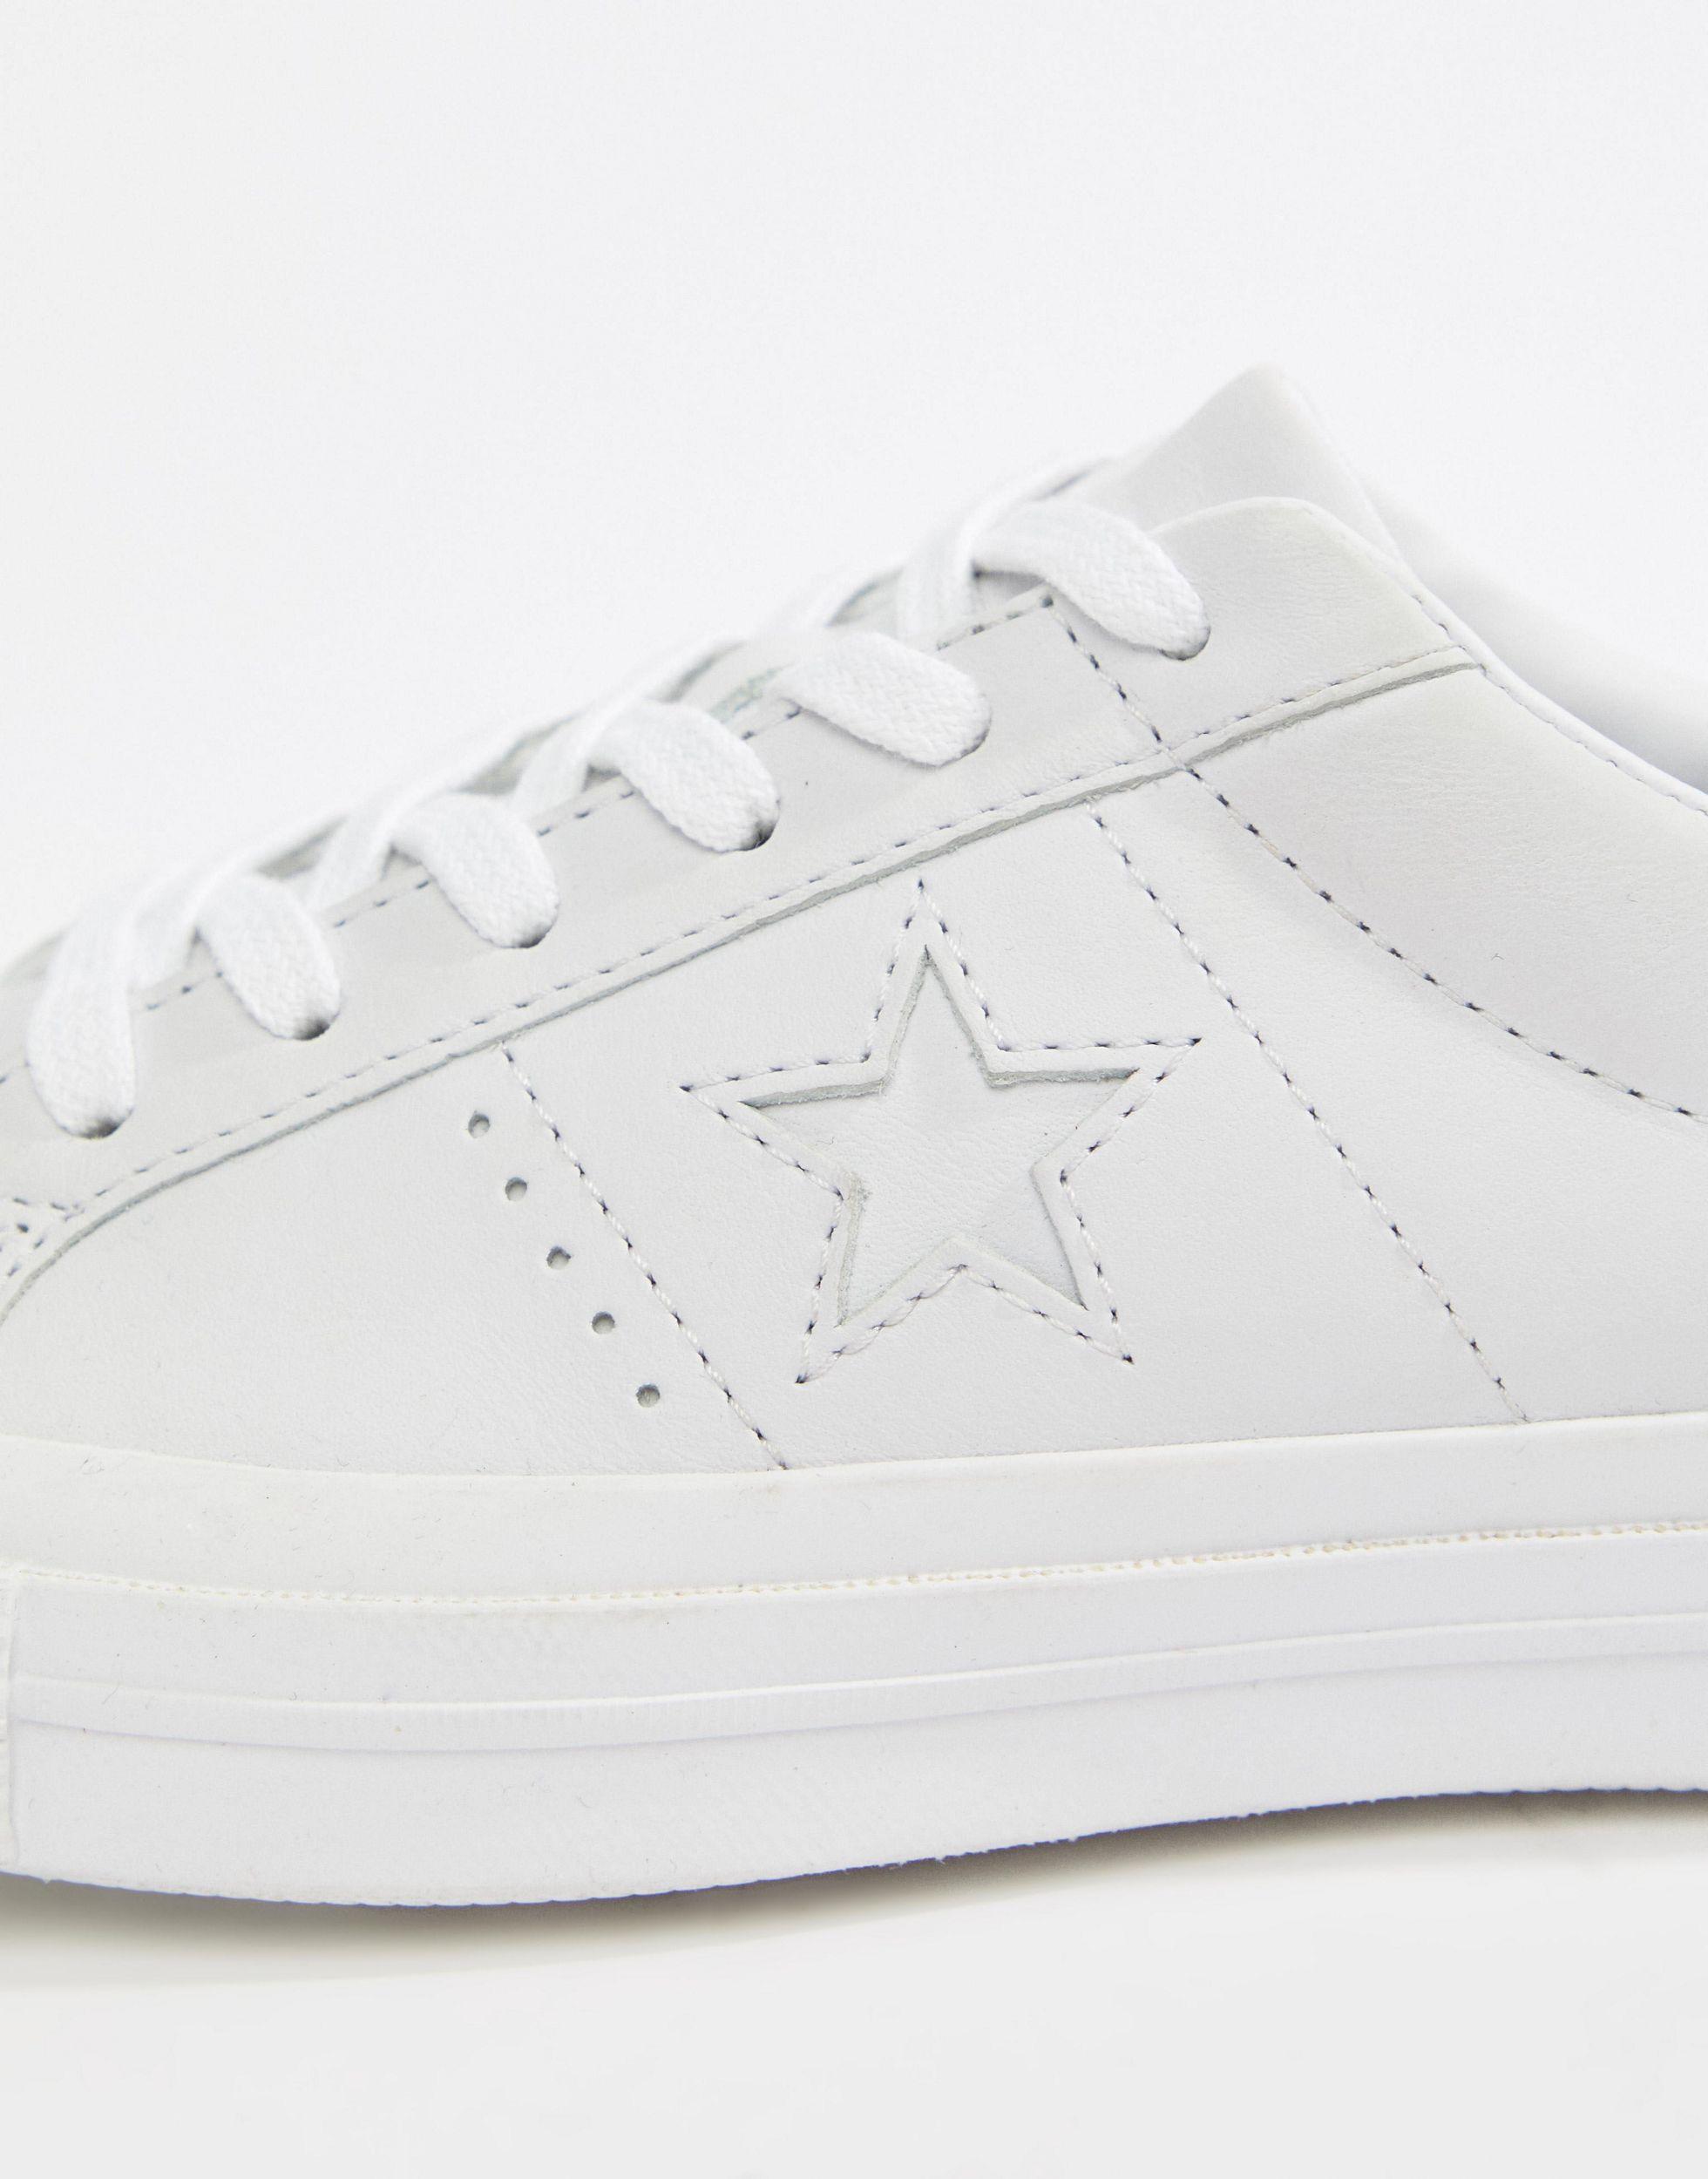 converse one star leather white